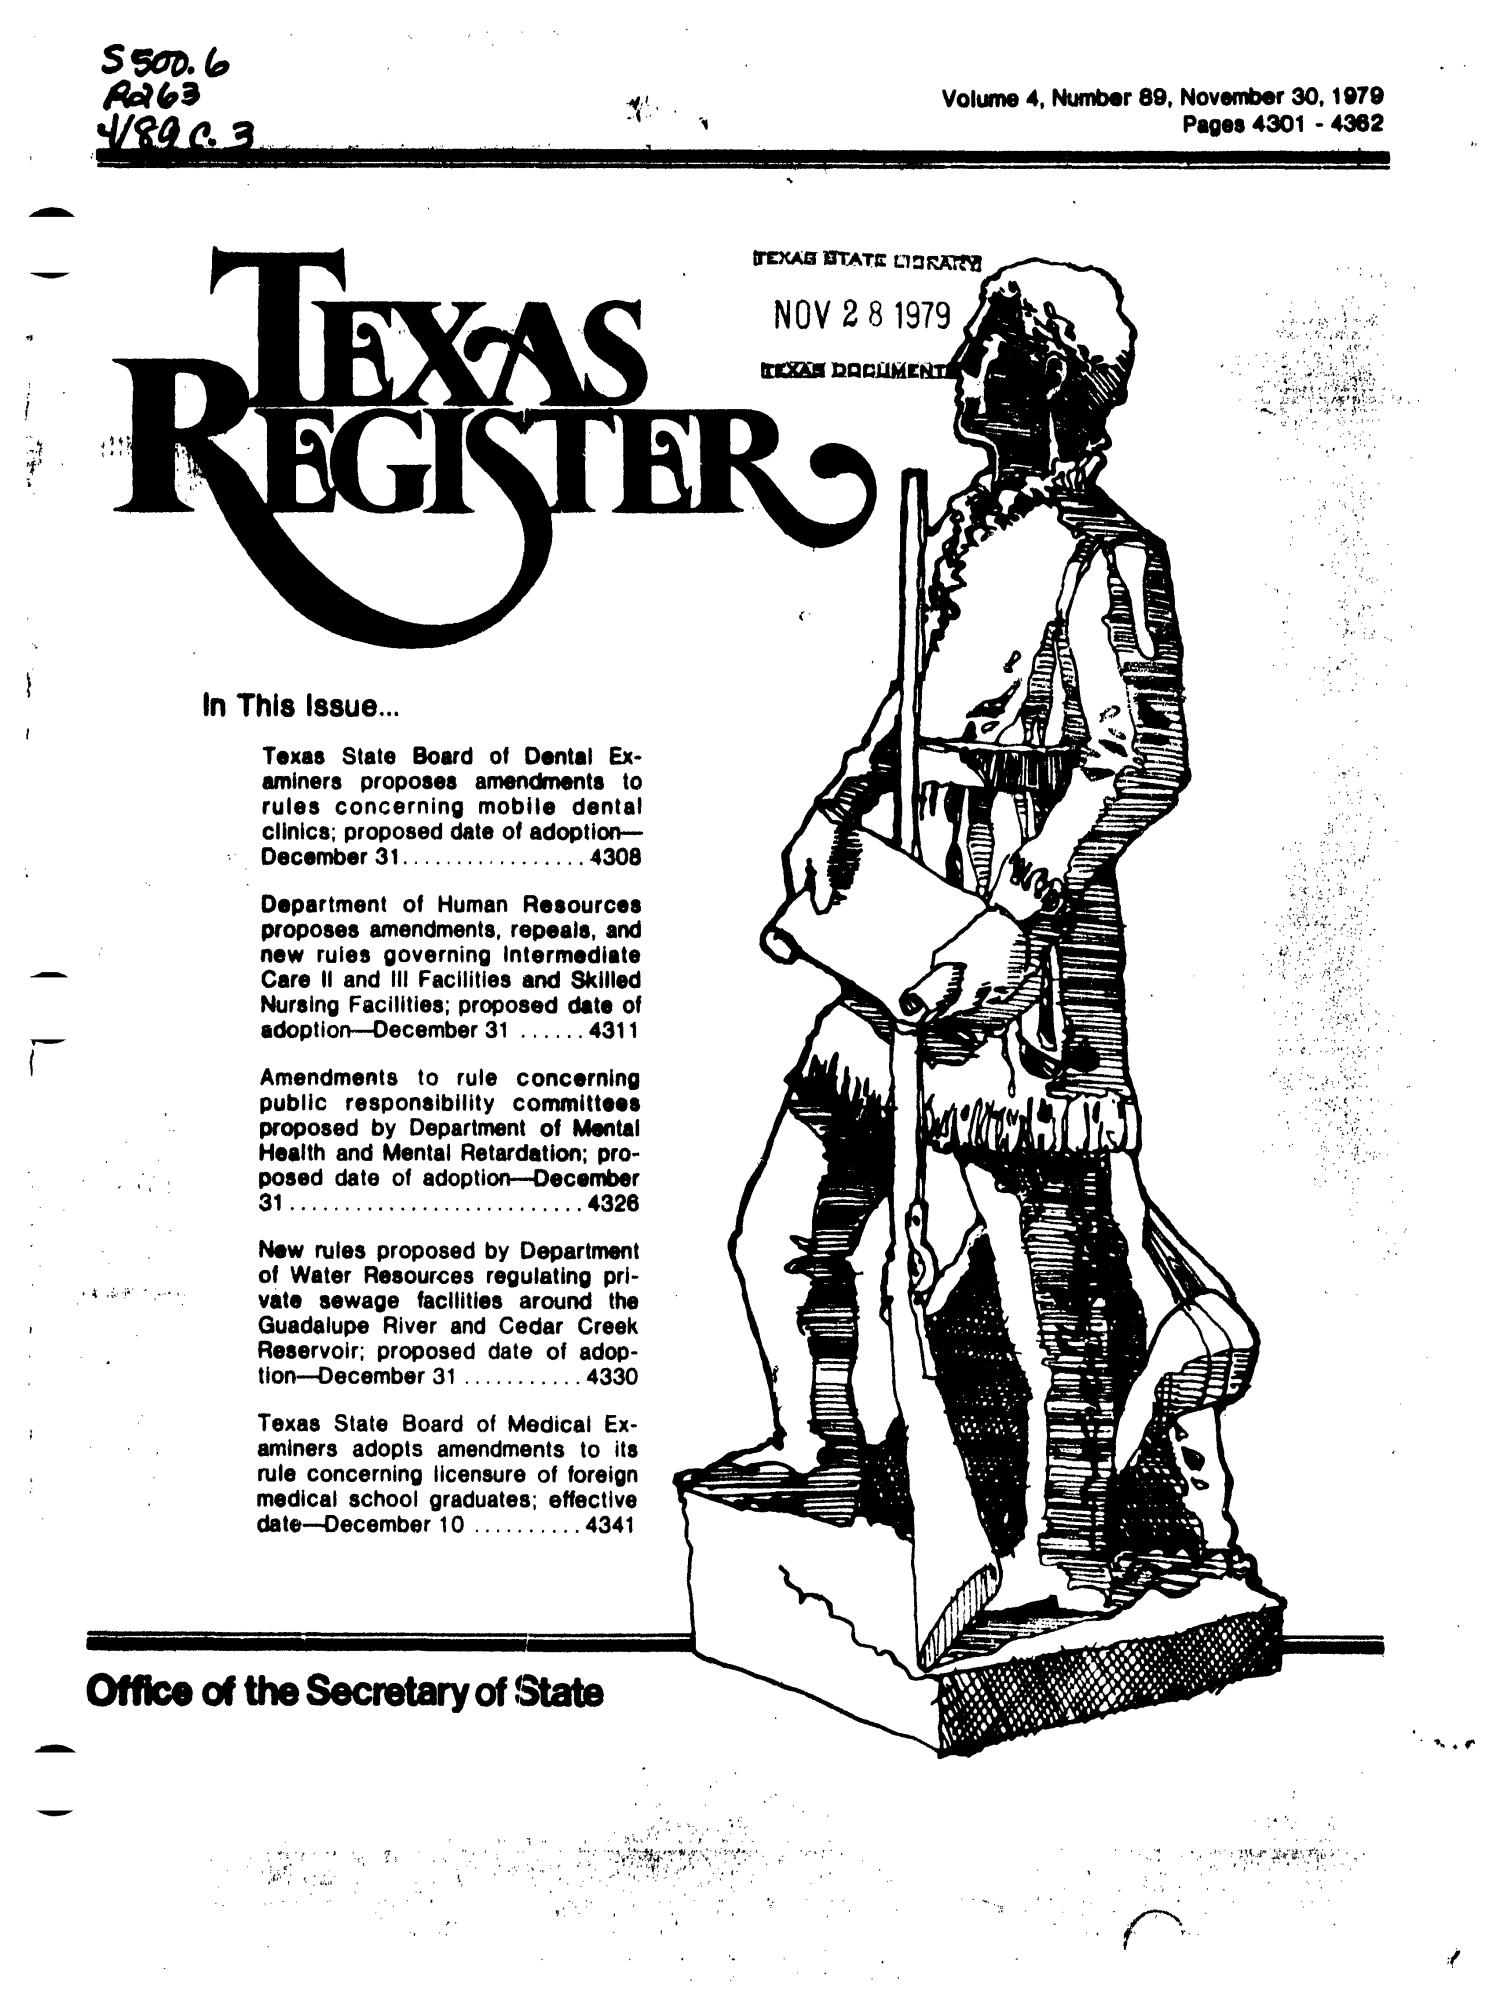 Texas Register, Volume 4, Number 89, Pages 4301-4362, November 30, 1979
                                                
                                                    Title Page
                                                